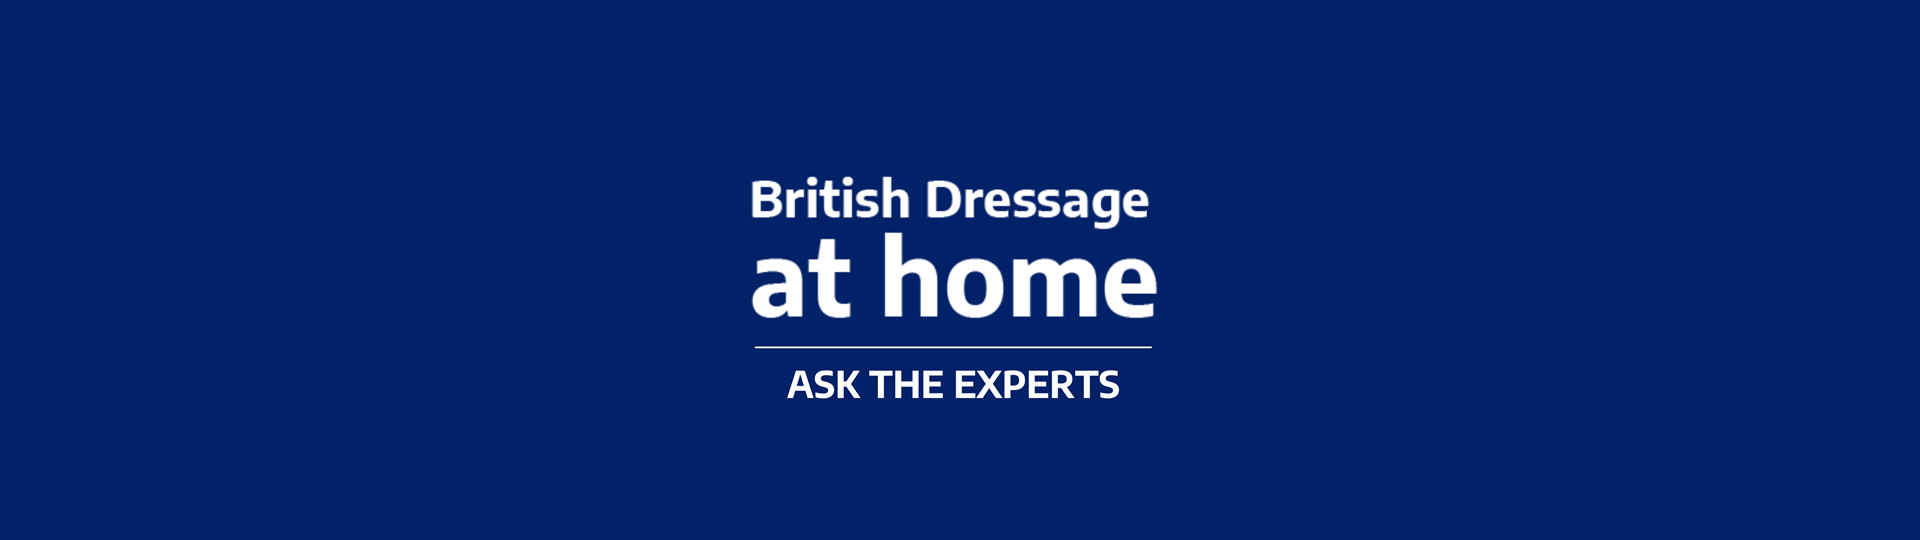 BD At Home Ask The Experts Banner